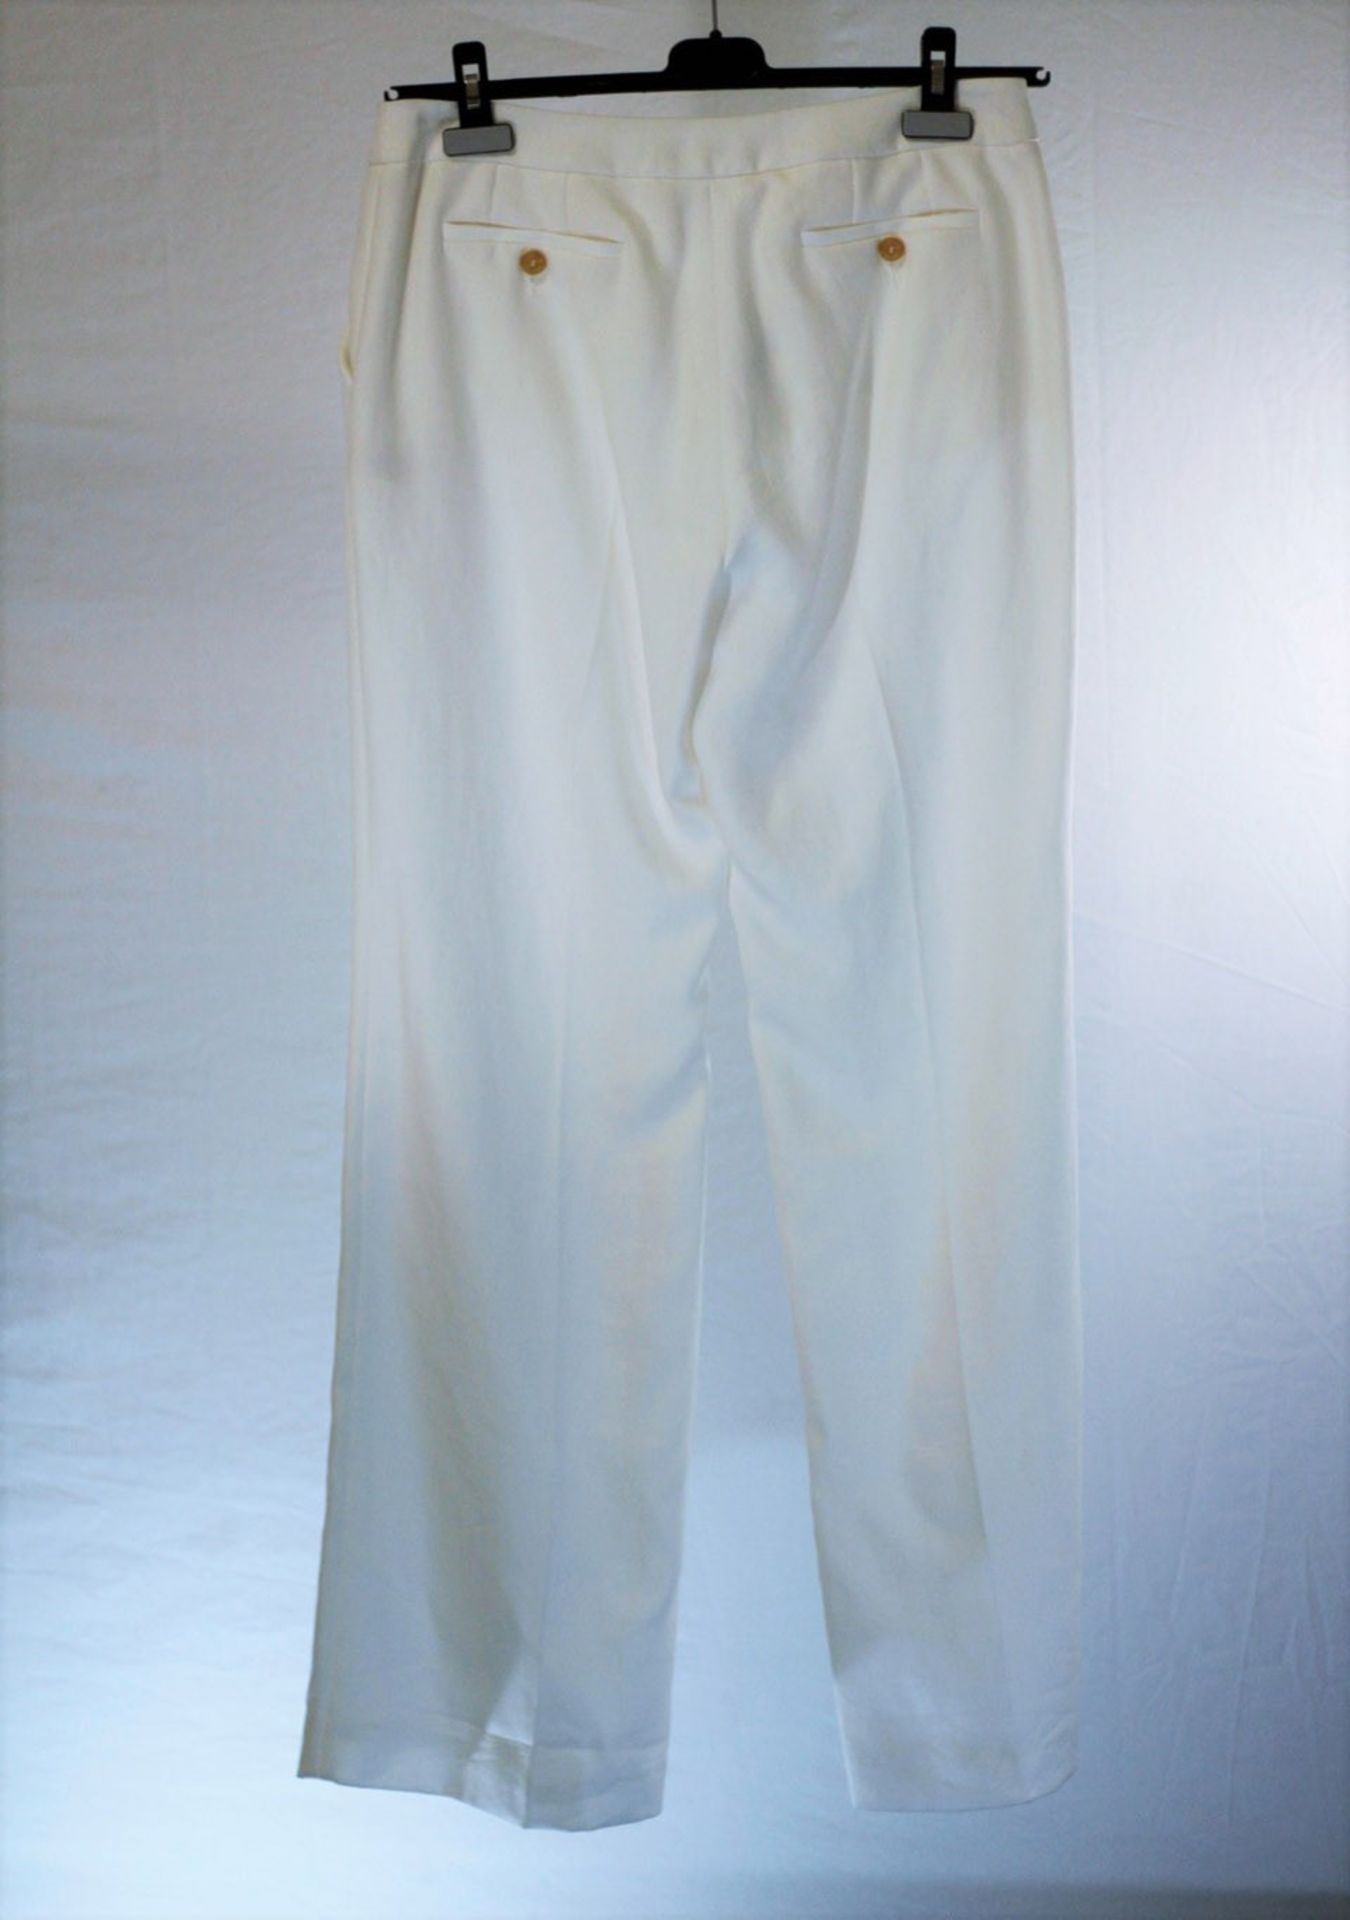 1 x Agnona White Trousers - Size: 16 - Material: 100% Ramie. Lining 52% Viscose, 48% Cotton - From a - Image 2 of 7